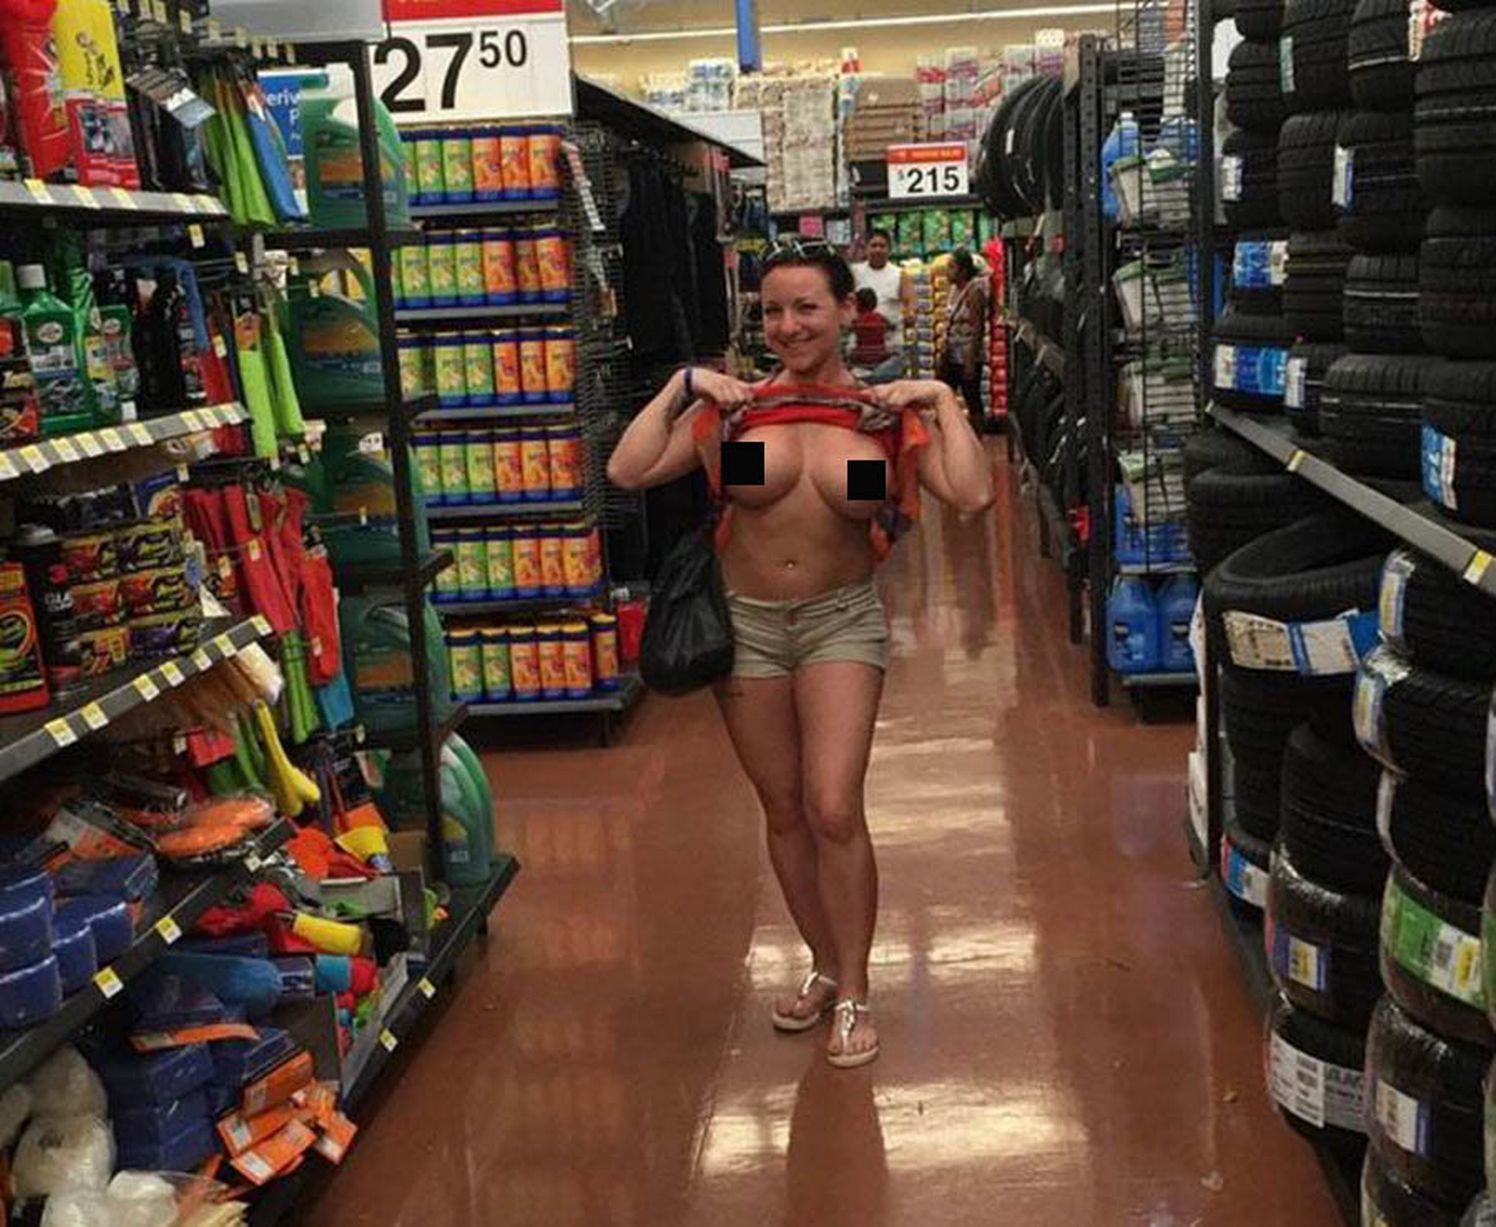 chloe marie murray recommends girl strips in store pic